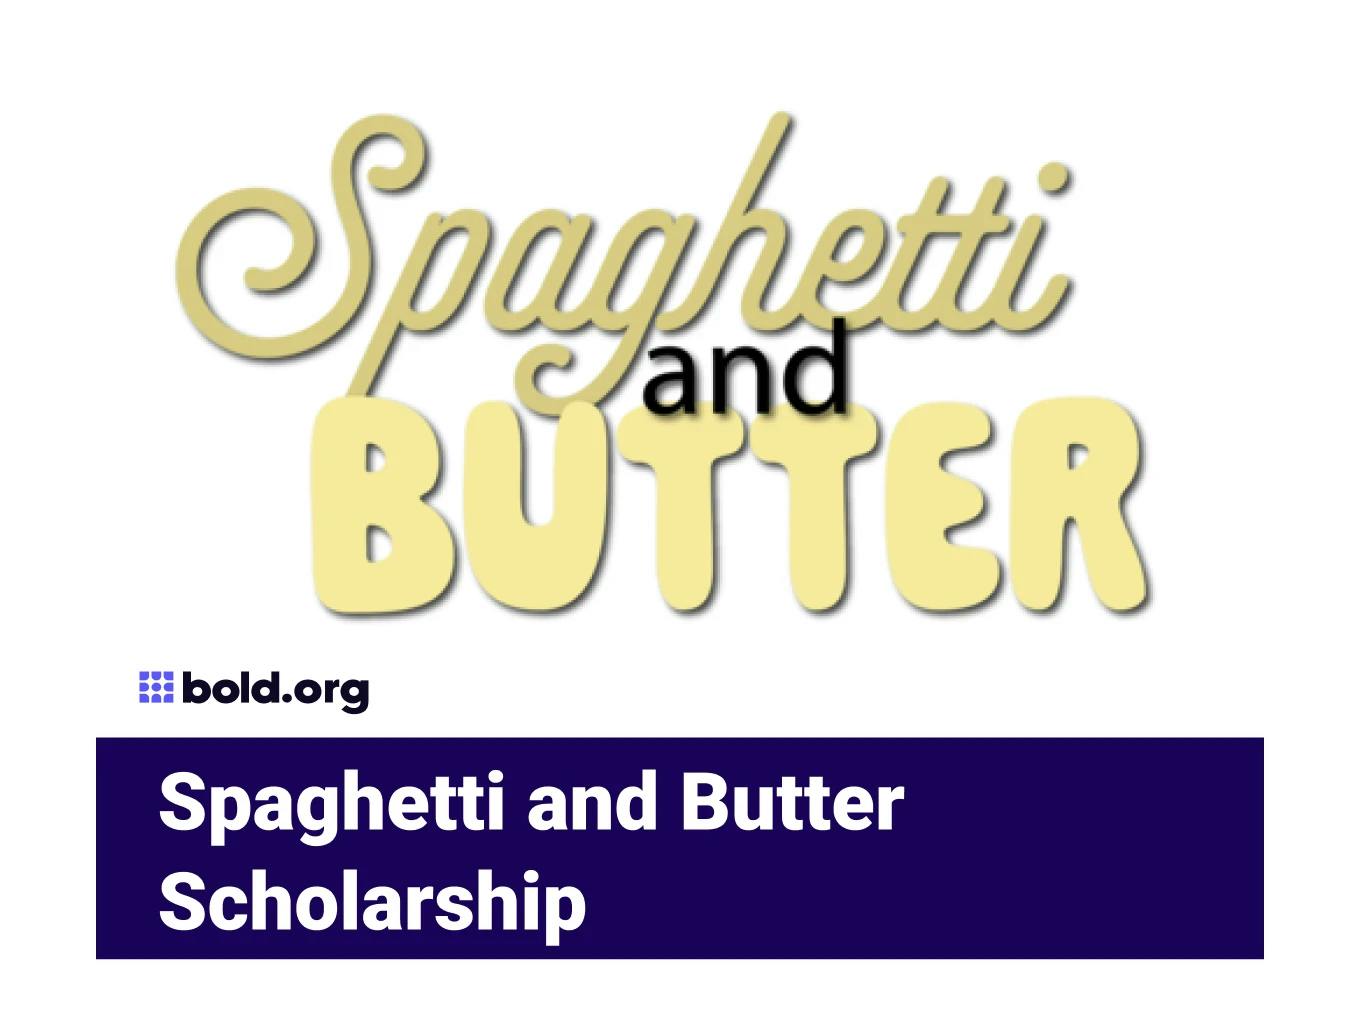 Spaghetti and Butter Scholarship